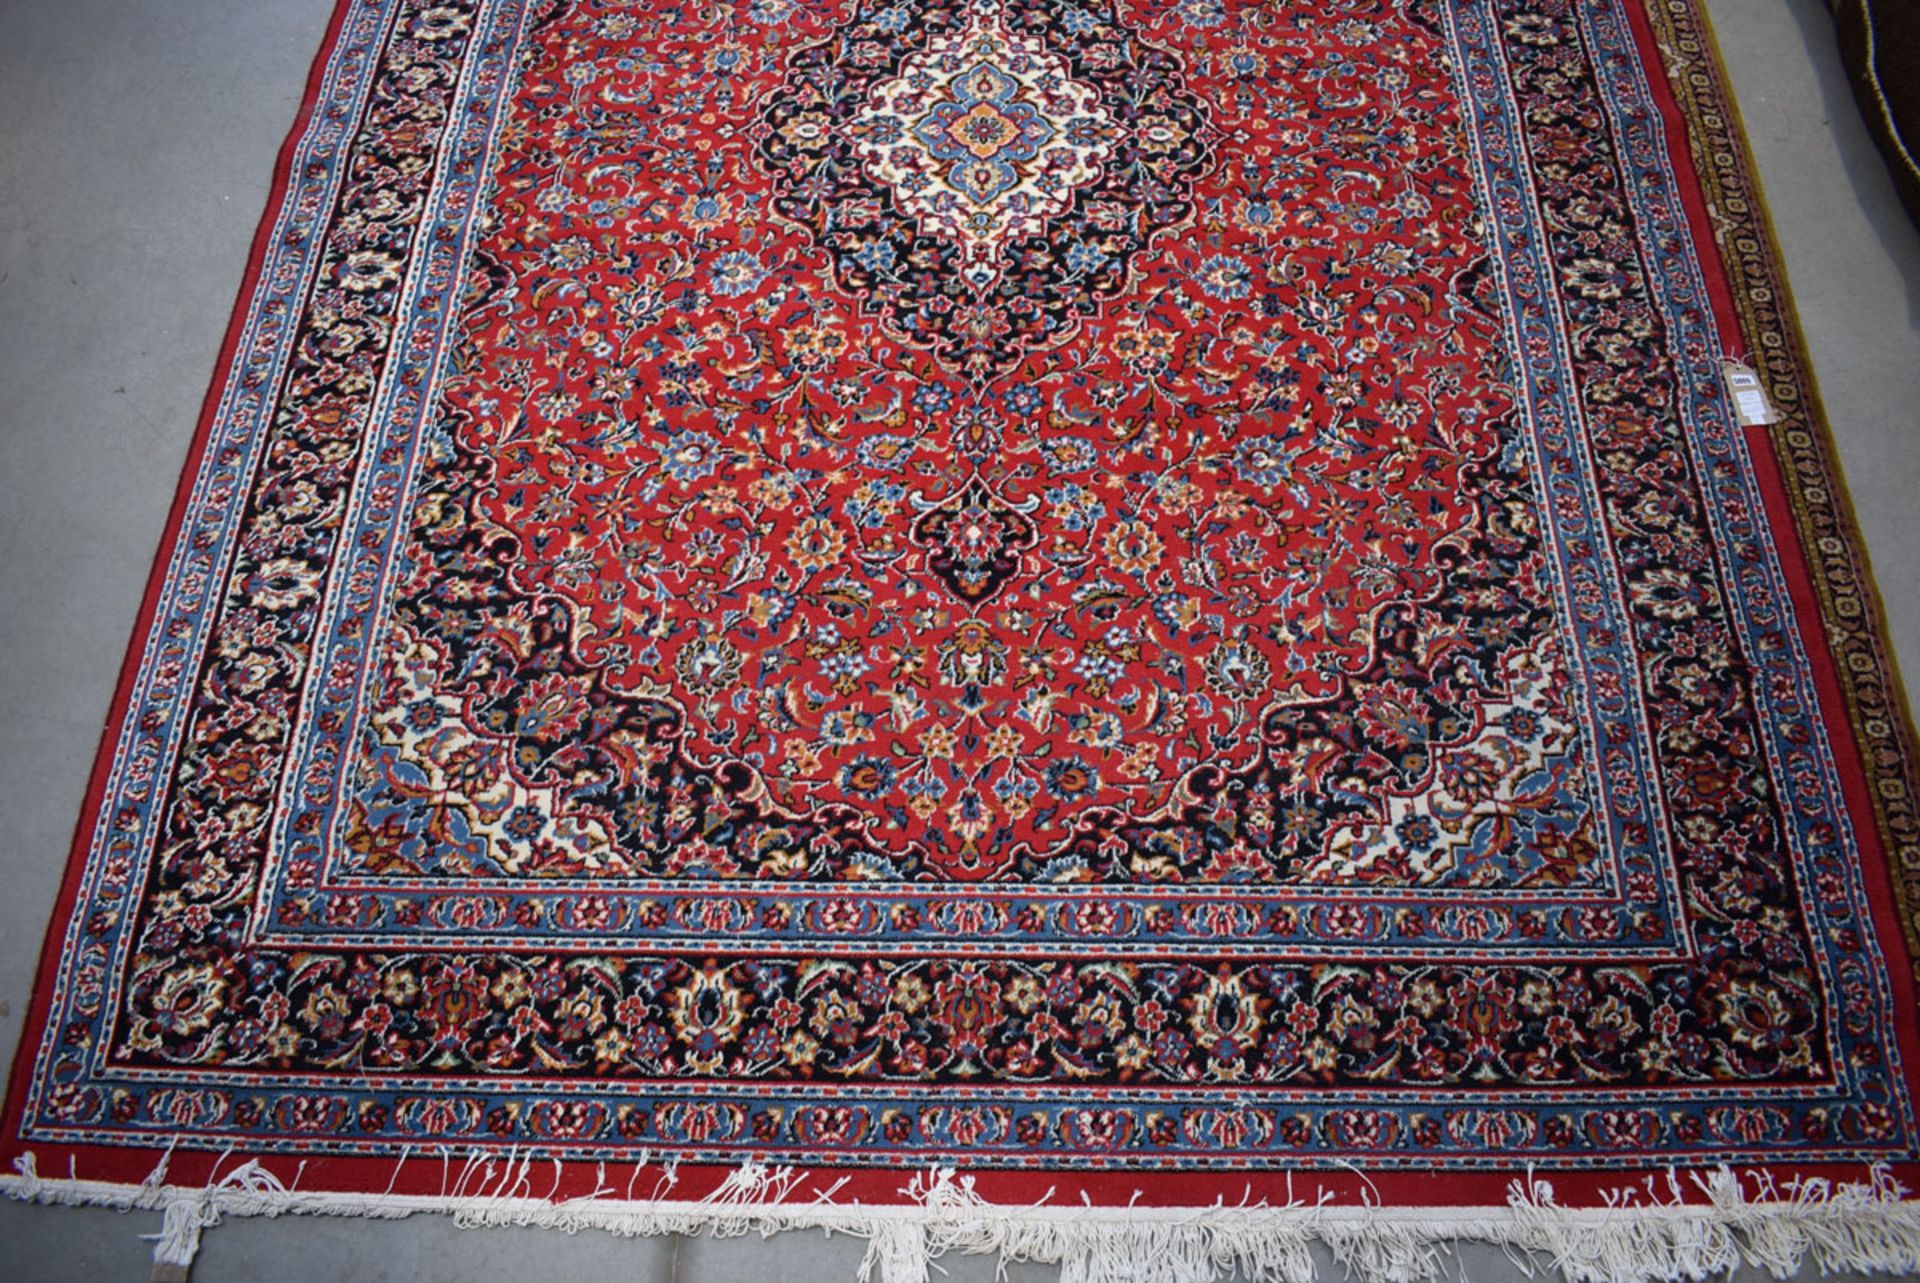 (11) An Iranian Pamchal carpet, red ground and blue border with Persian style foliate decoration